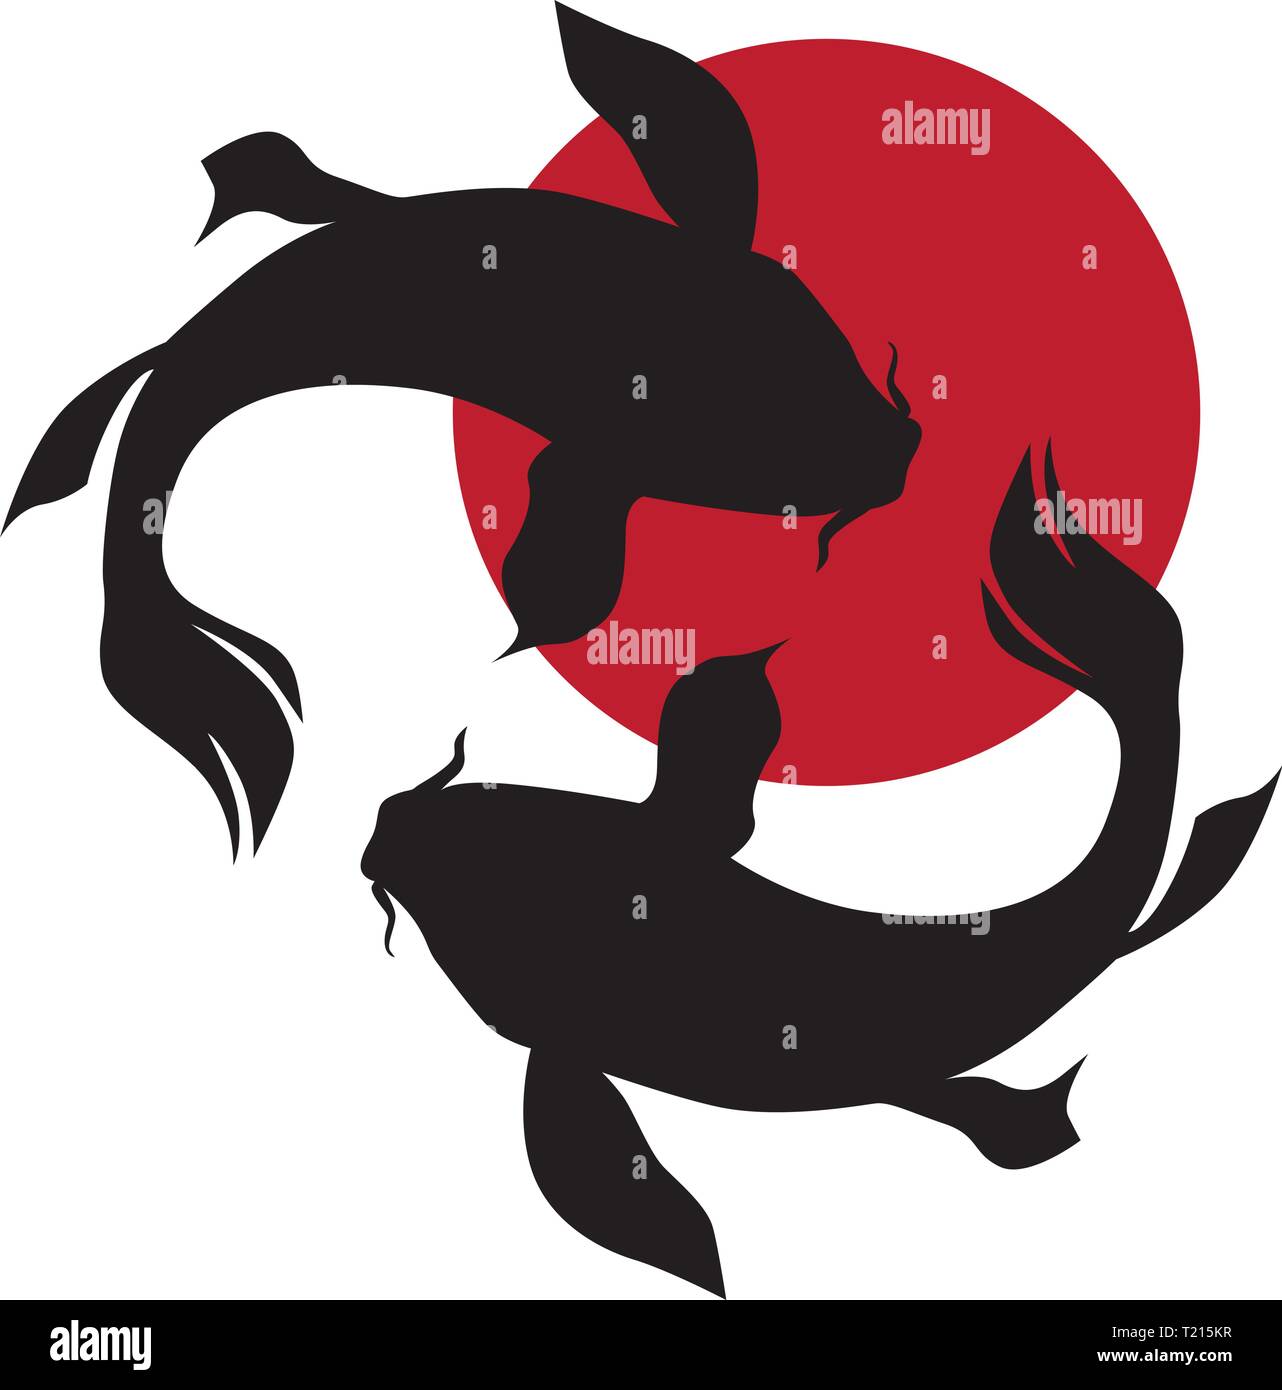 Koi Fishes Logo. Luck, prosperity and good fortune. Stock Vector